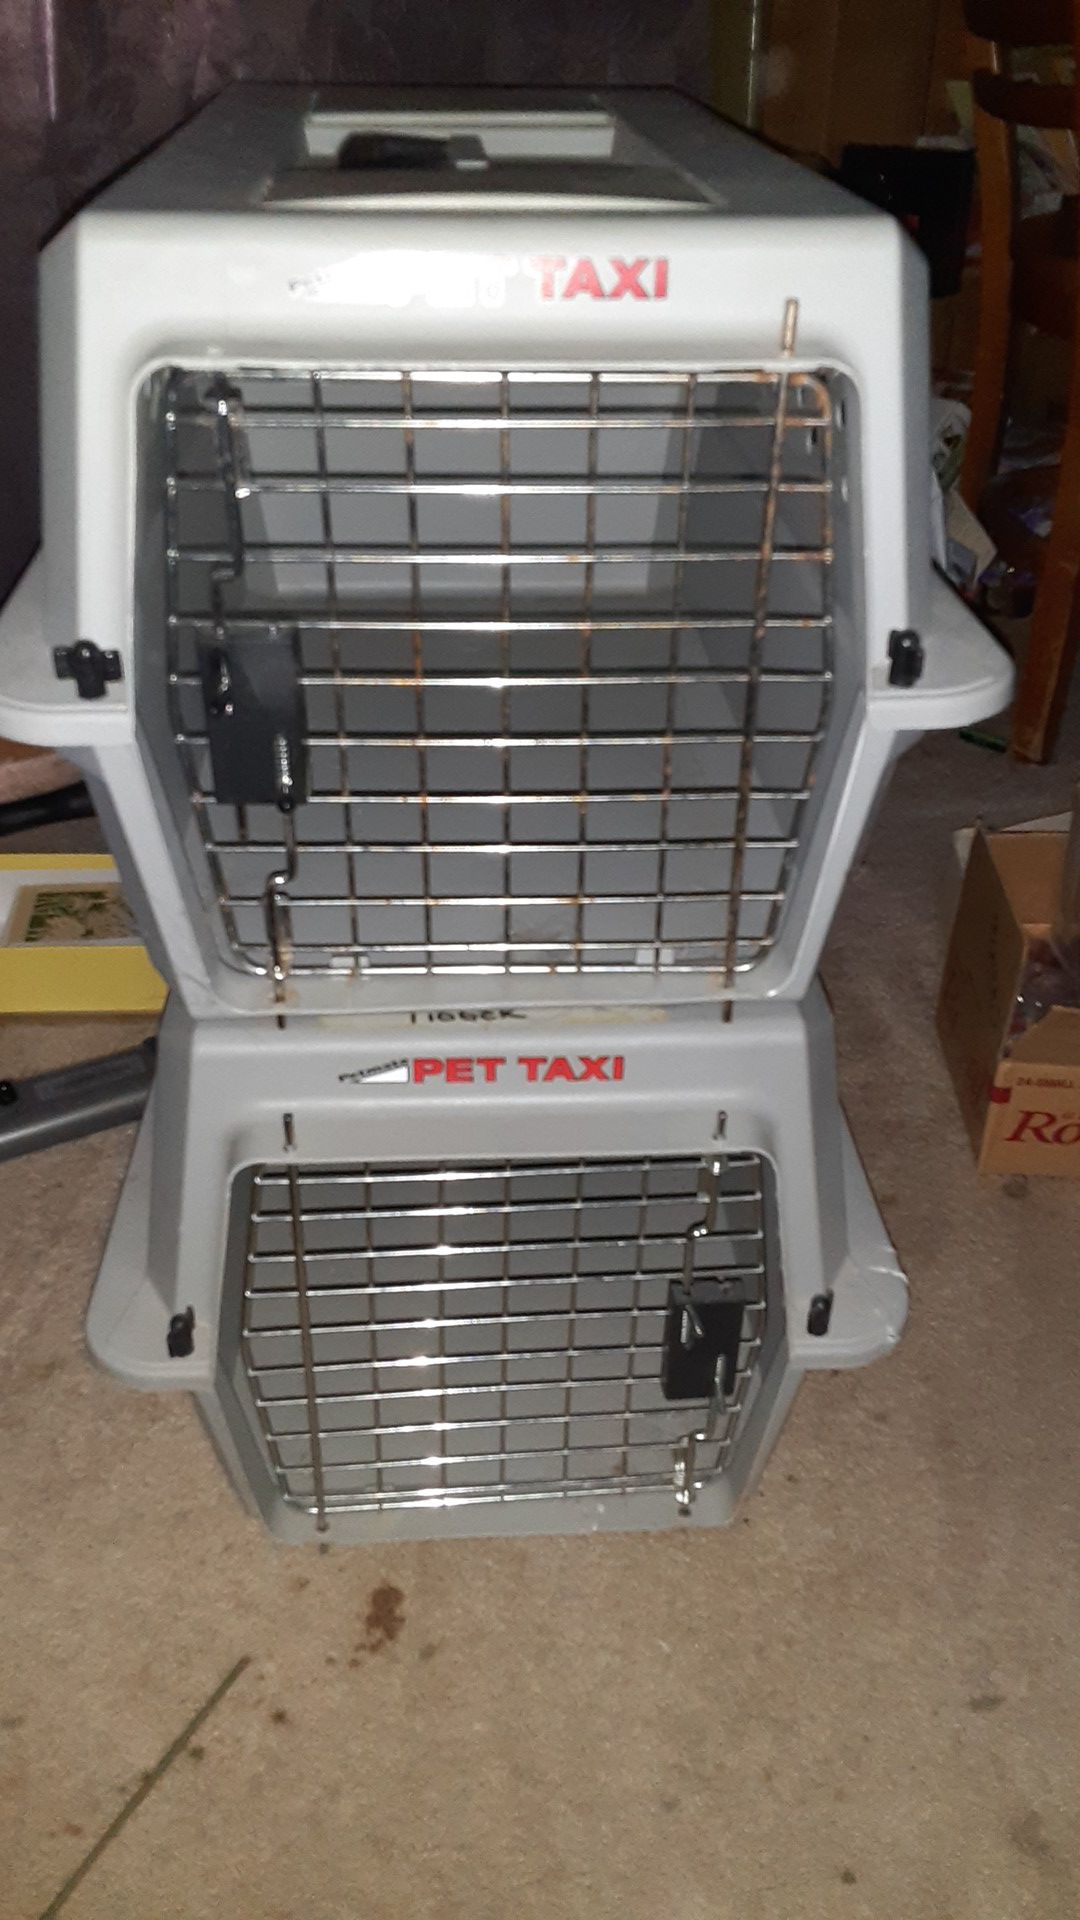 Pet taxi(cat or small dog carrier)